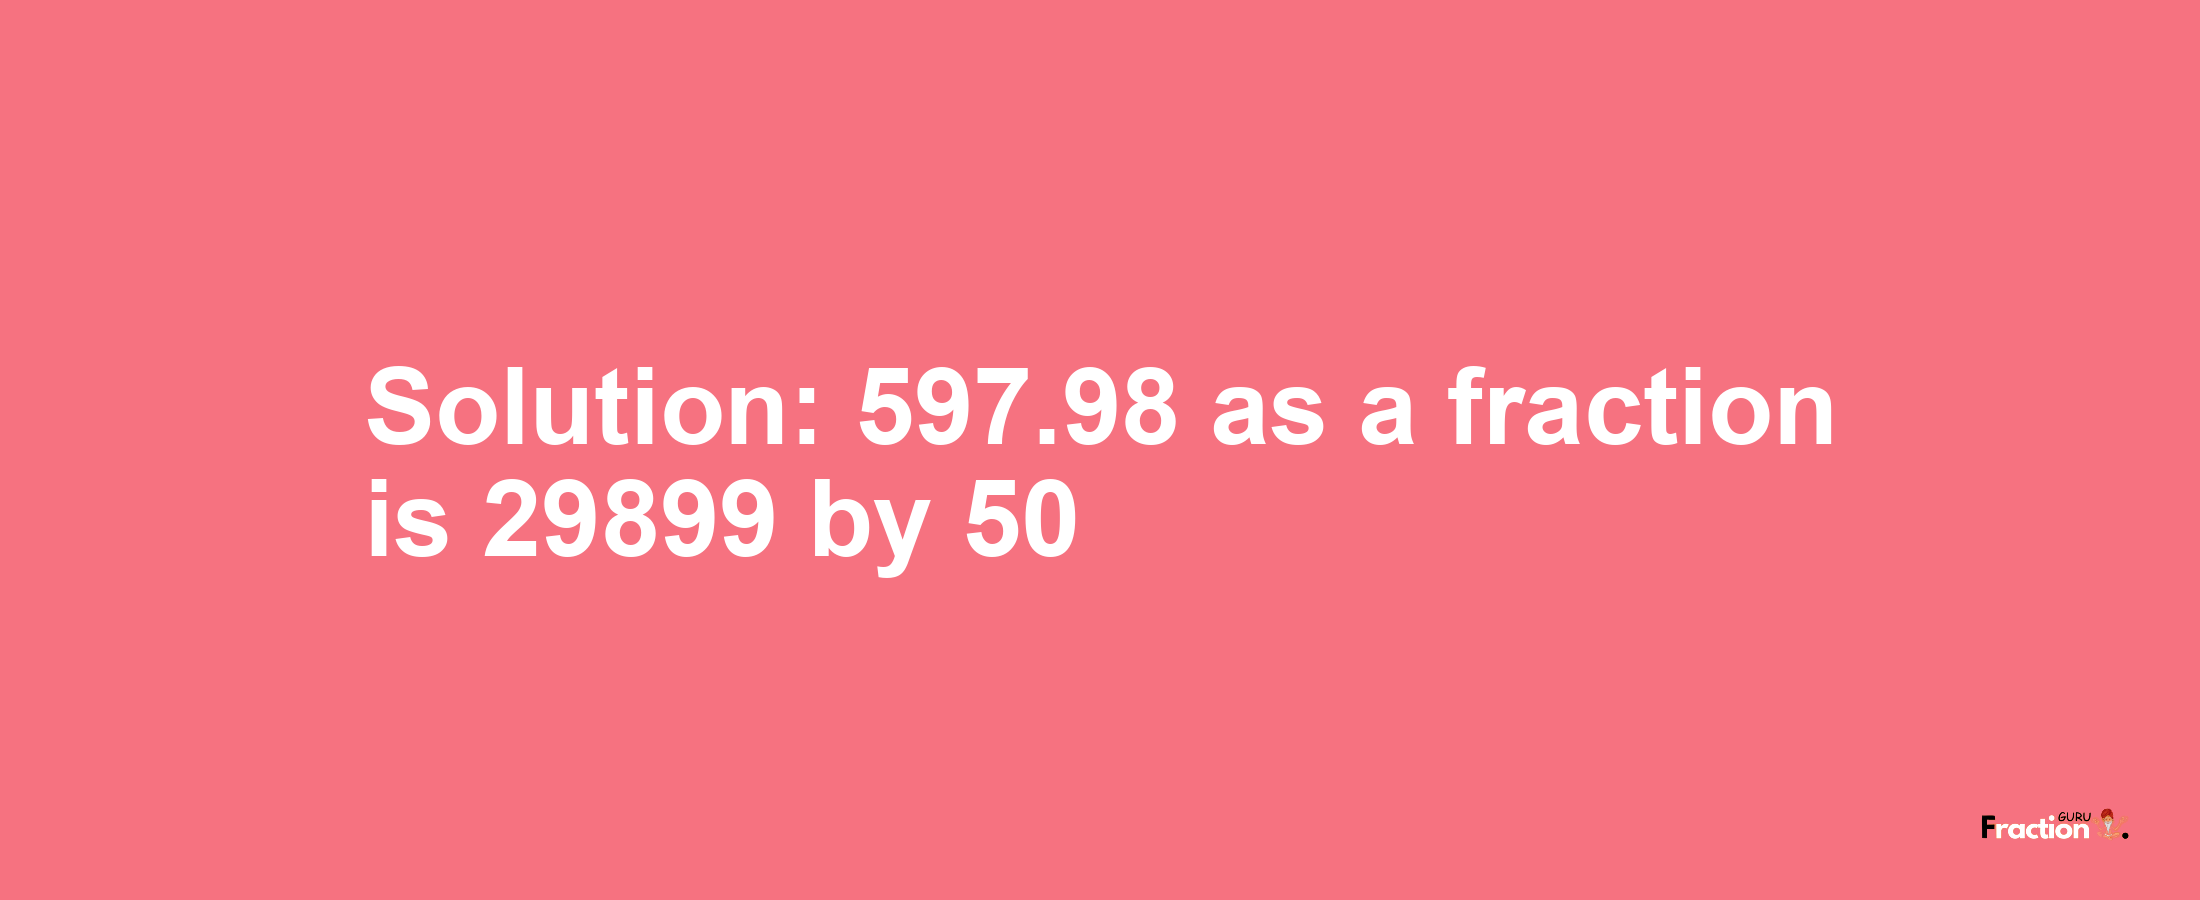 Solution:597.98 as a fraction is 29899/50